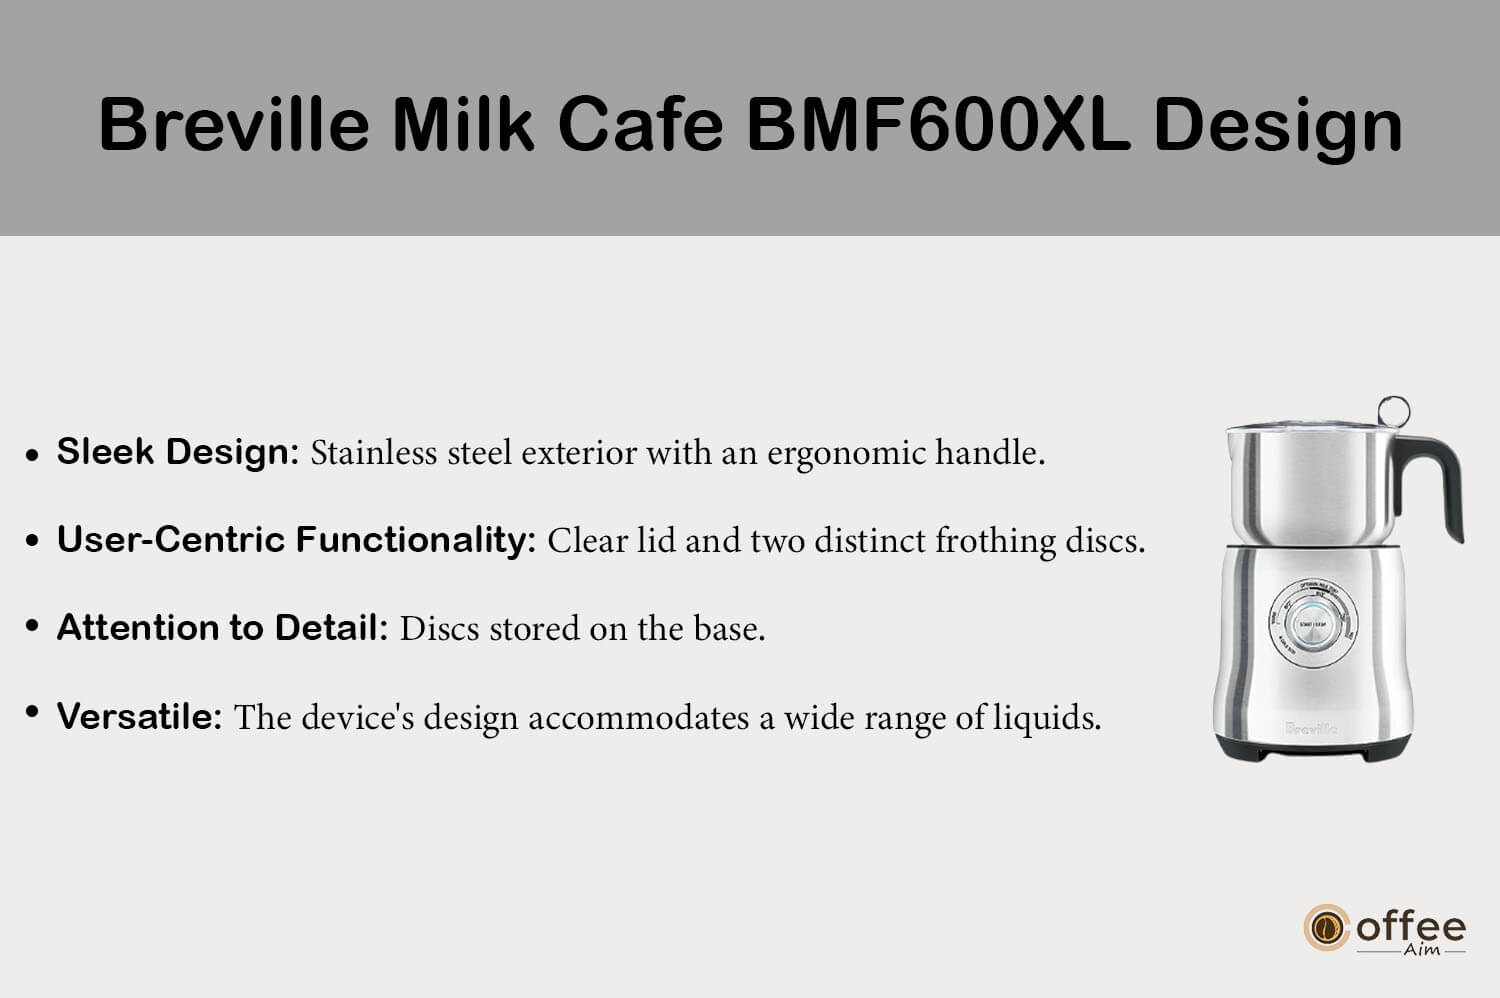 This visual representation highlights the design elements of the "Breville Milk Cafe BMF600XL" as detailed in the "Breville Milk Cafe BMF600XL Review" article.